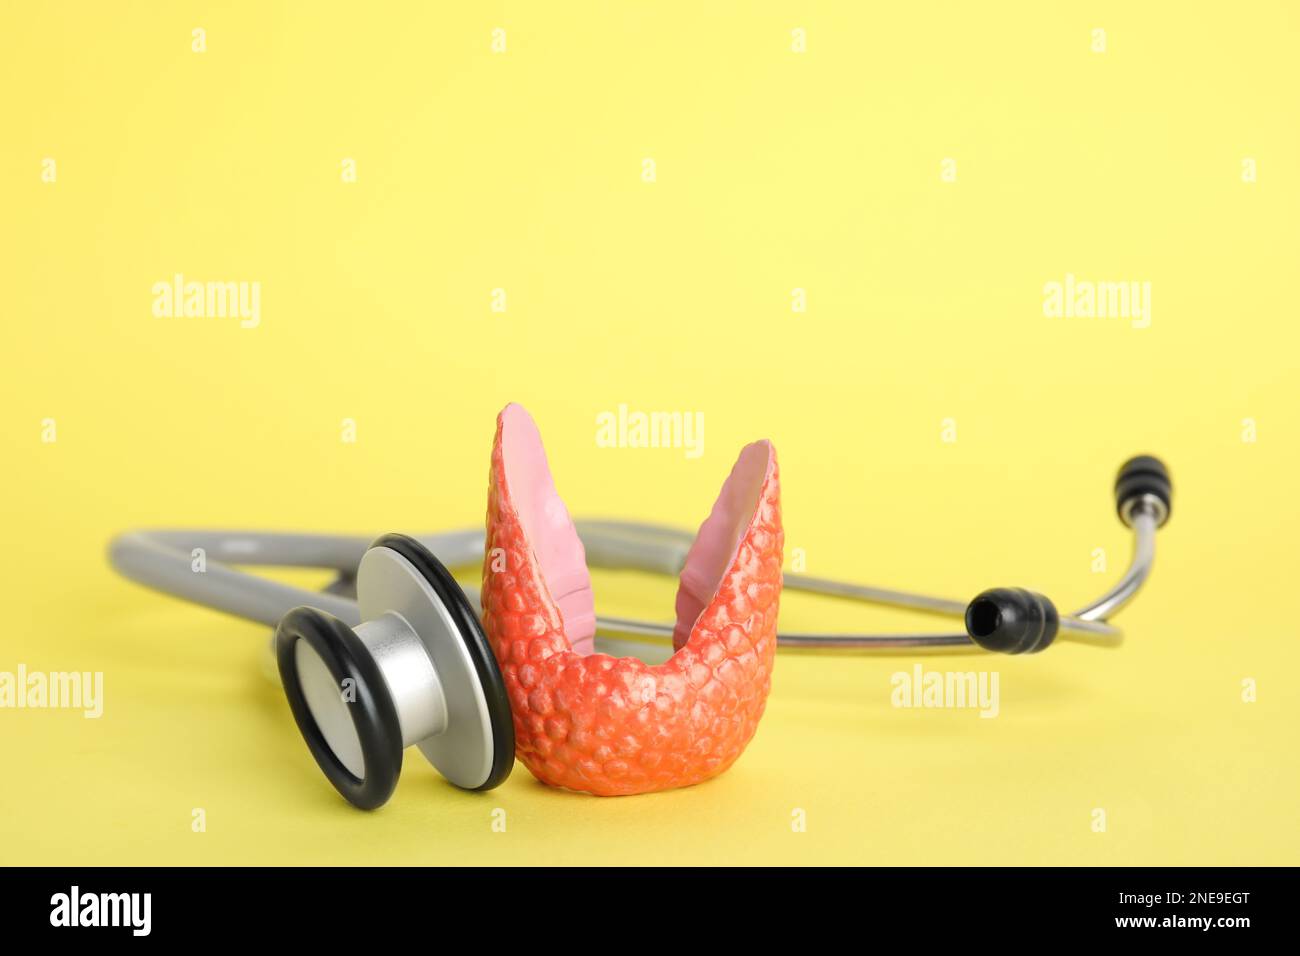 Plastic model of healthy thyroid and stethoscope on yellow background Stock Photo